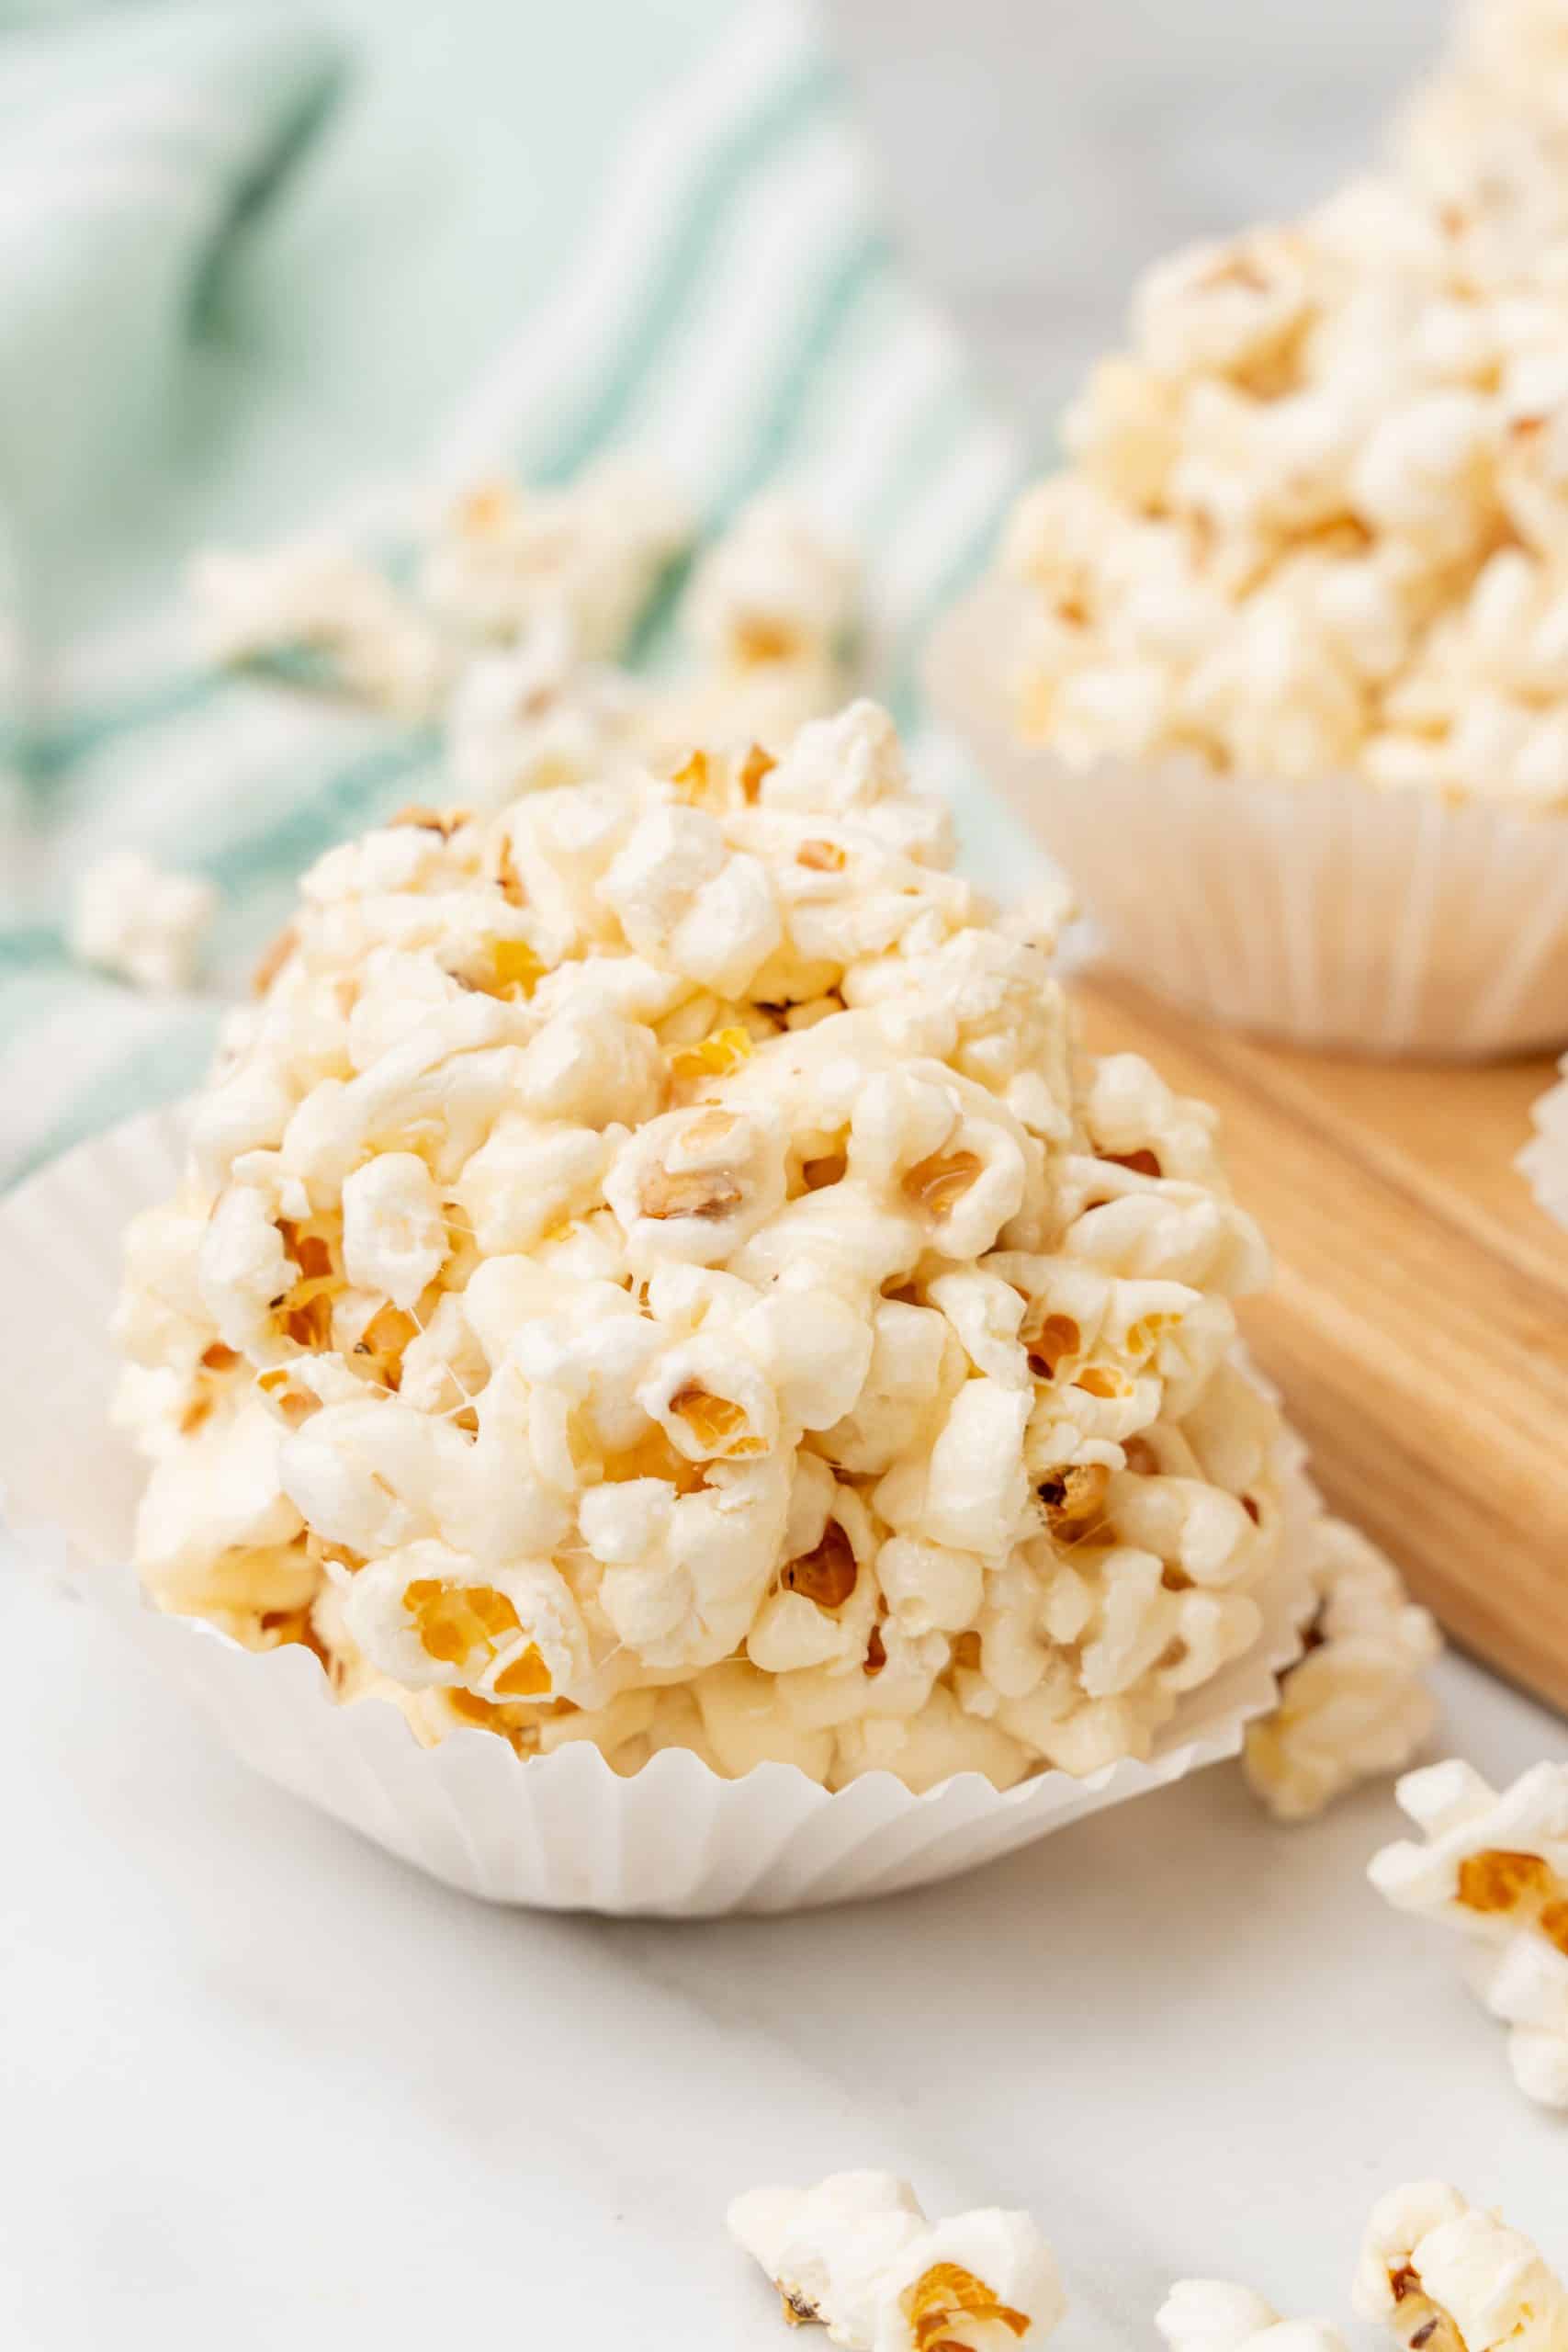 marshmallow popcorn balls in white cupcake liners on a wooden cutting board